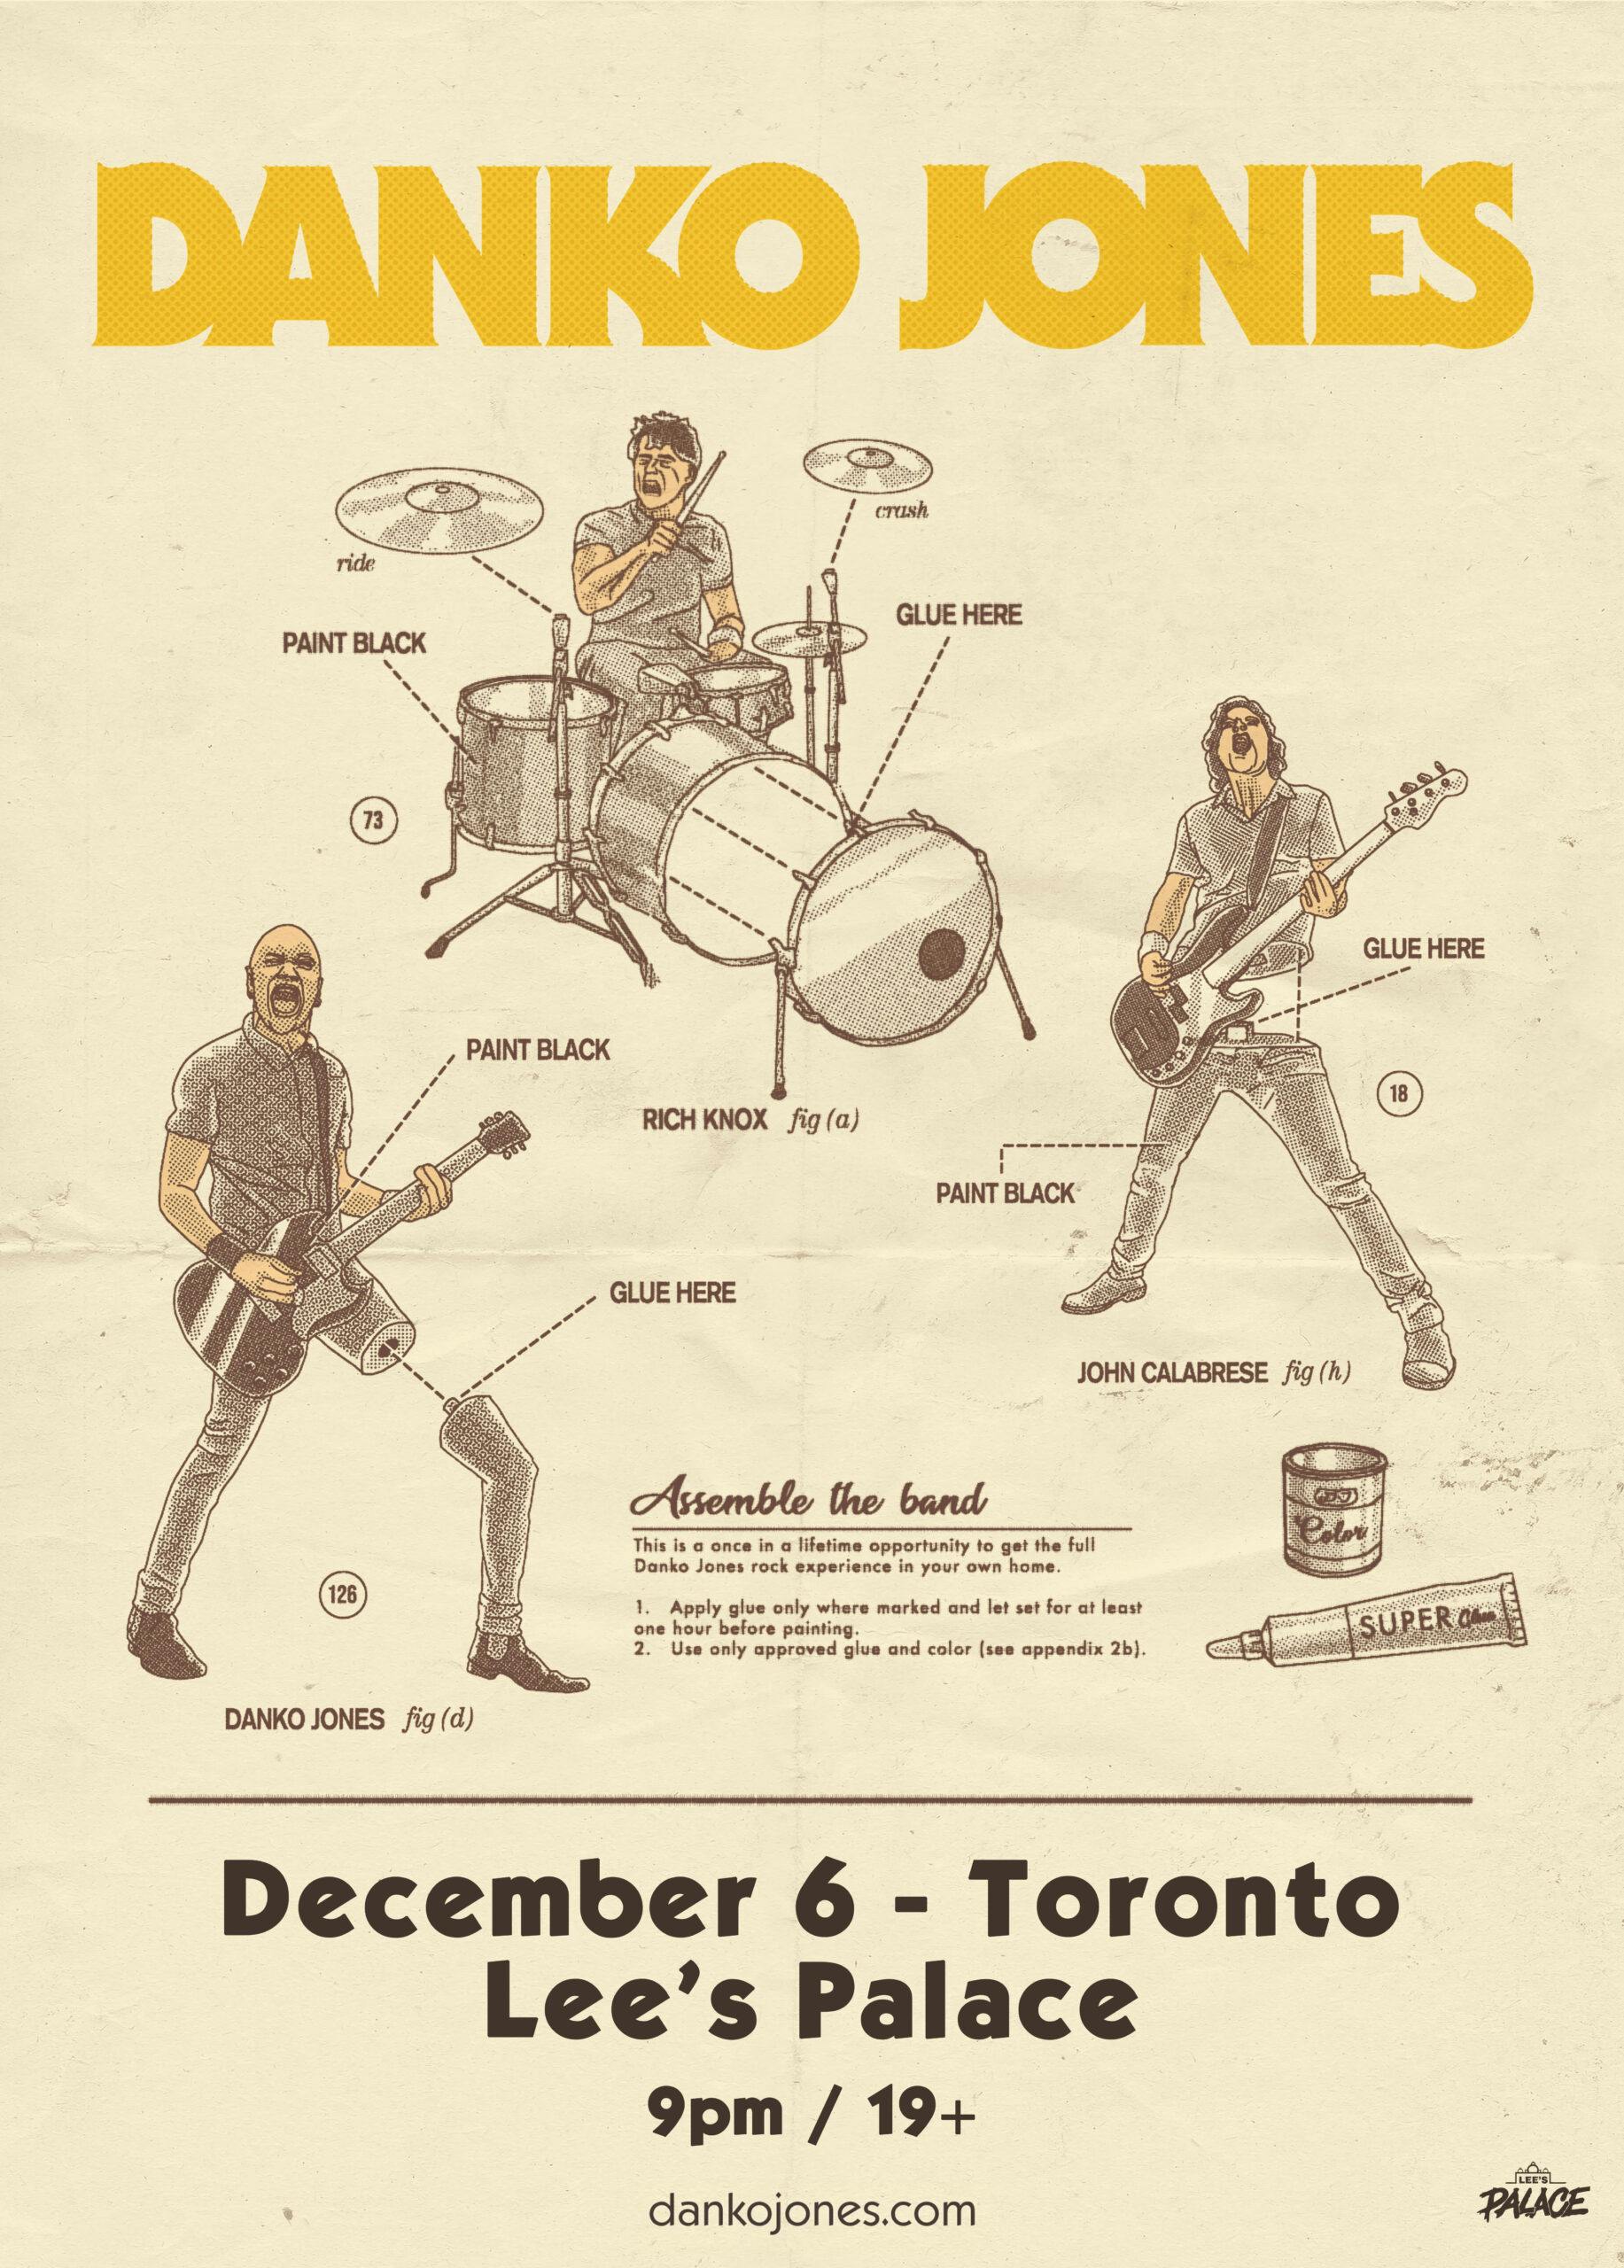 Show in Toronto announced